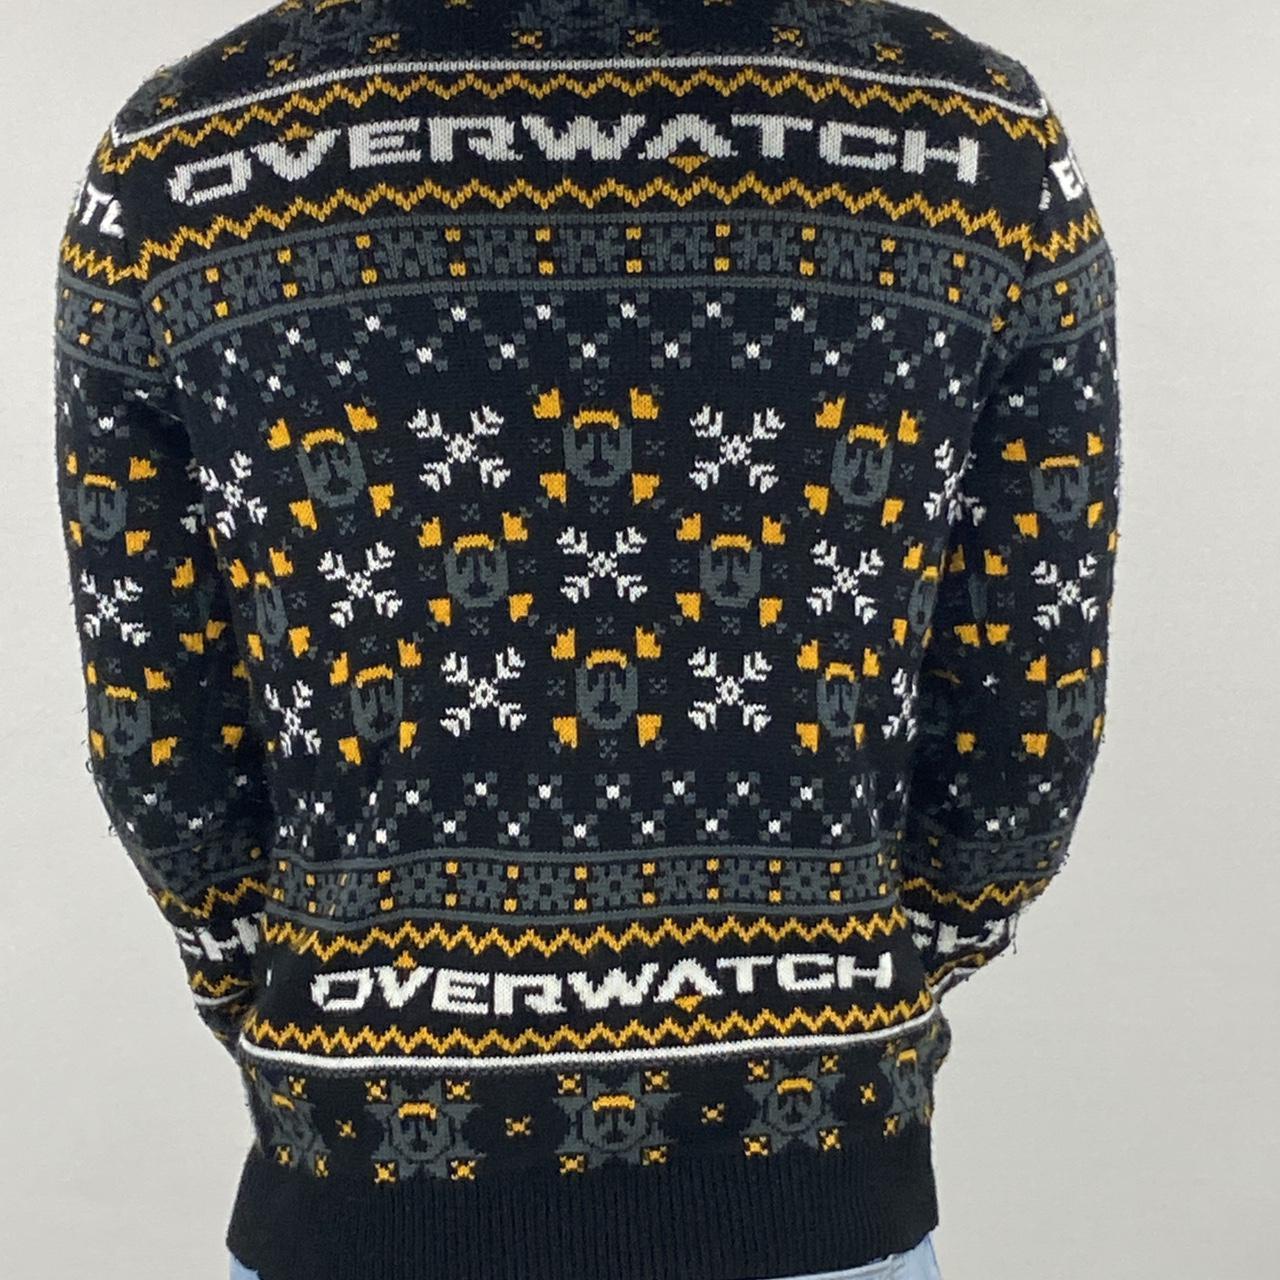 Product Image 2 - Slick Overwatch game Christmas sweater,